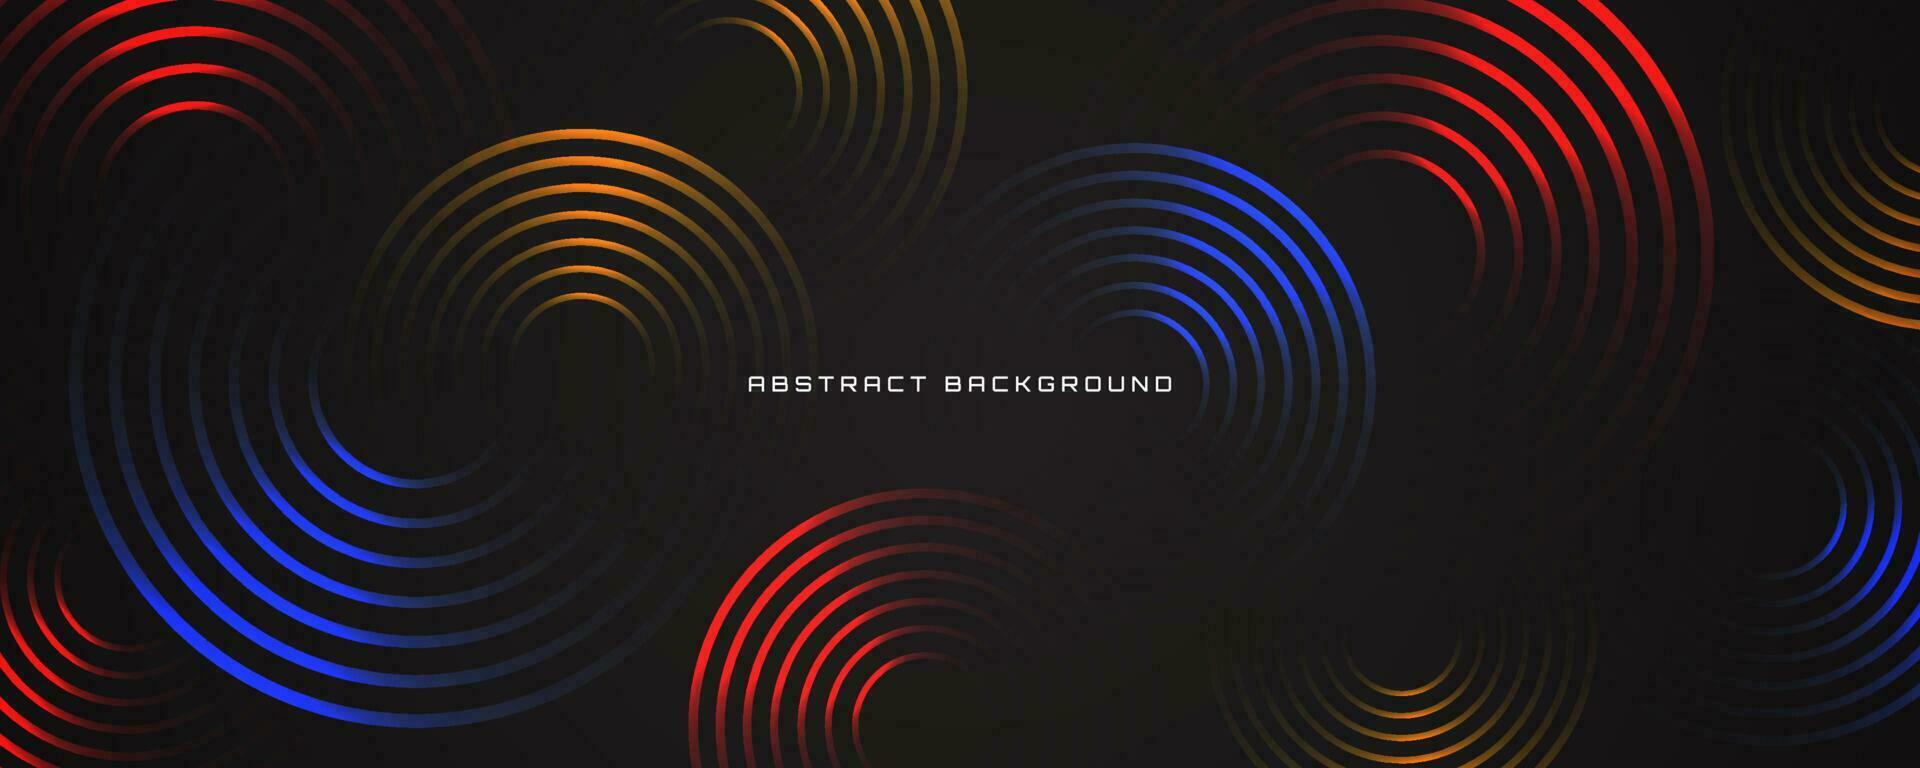 3D colorful geometric abstract background overlap layer on dark space with circle gradient effect decoration. Graphic design element modern style concept for banner, flyer, card, or brochure cover vector